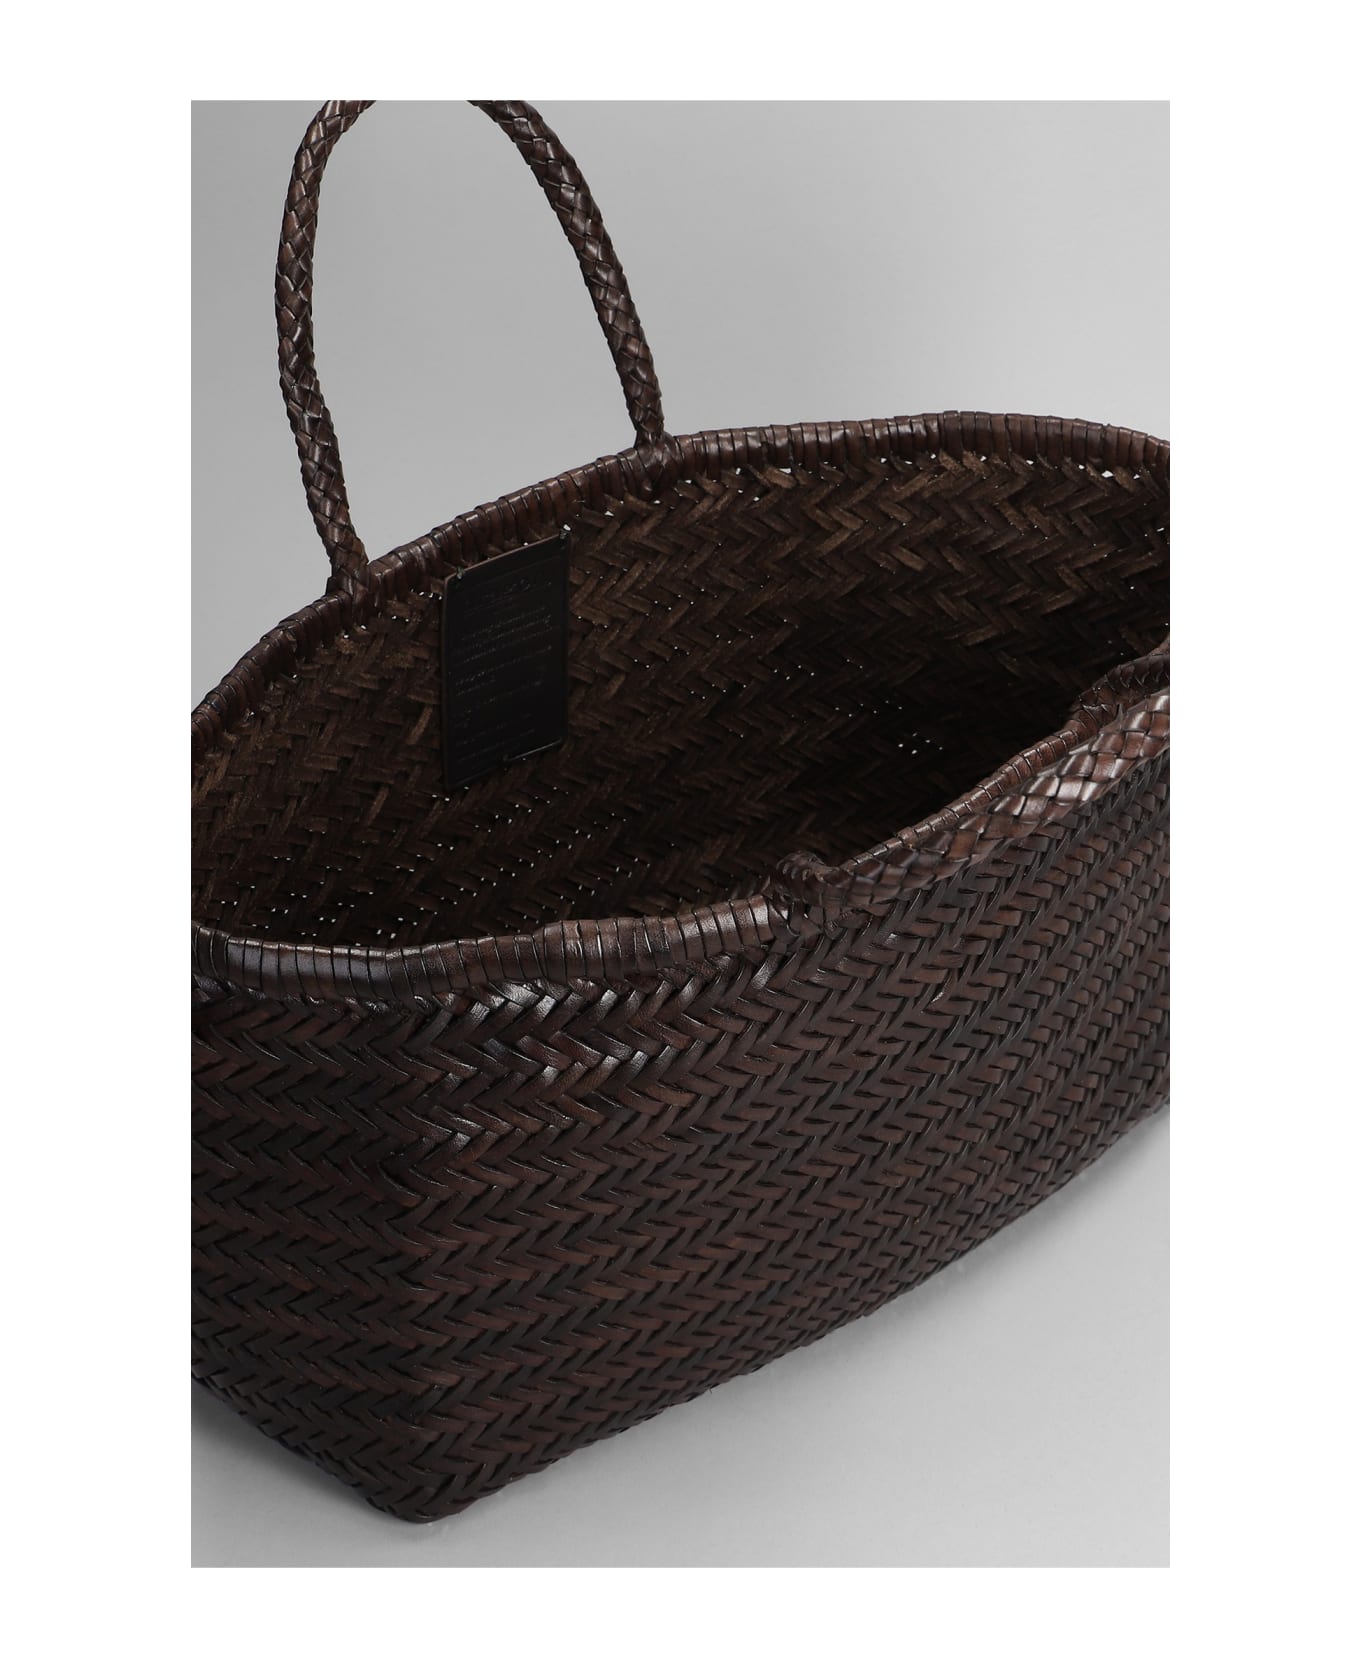 Dragon Diffusion Bamboo Triple Jump Tote In Brown Leather - brown